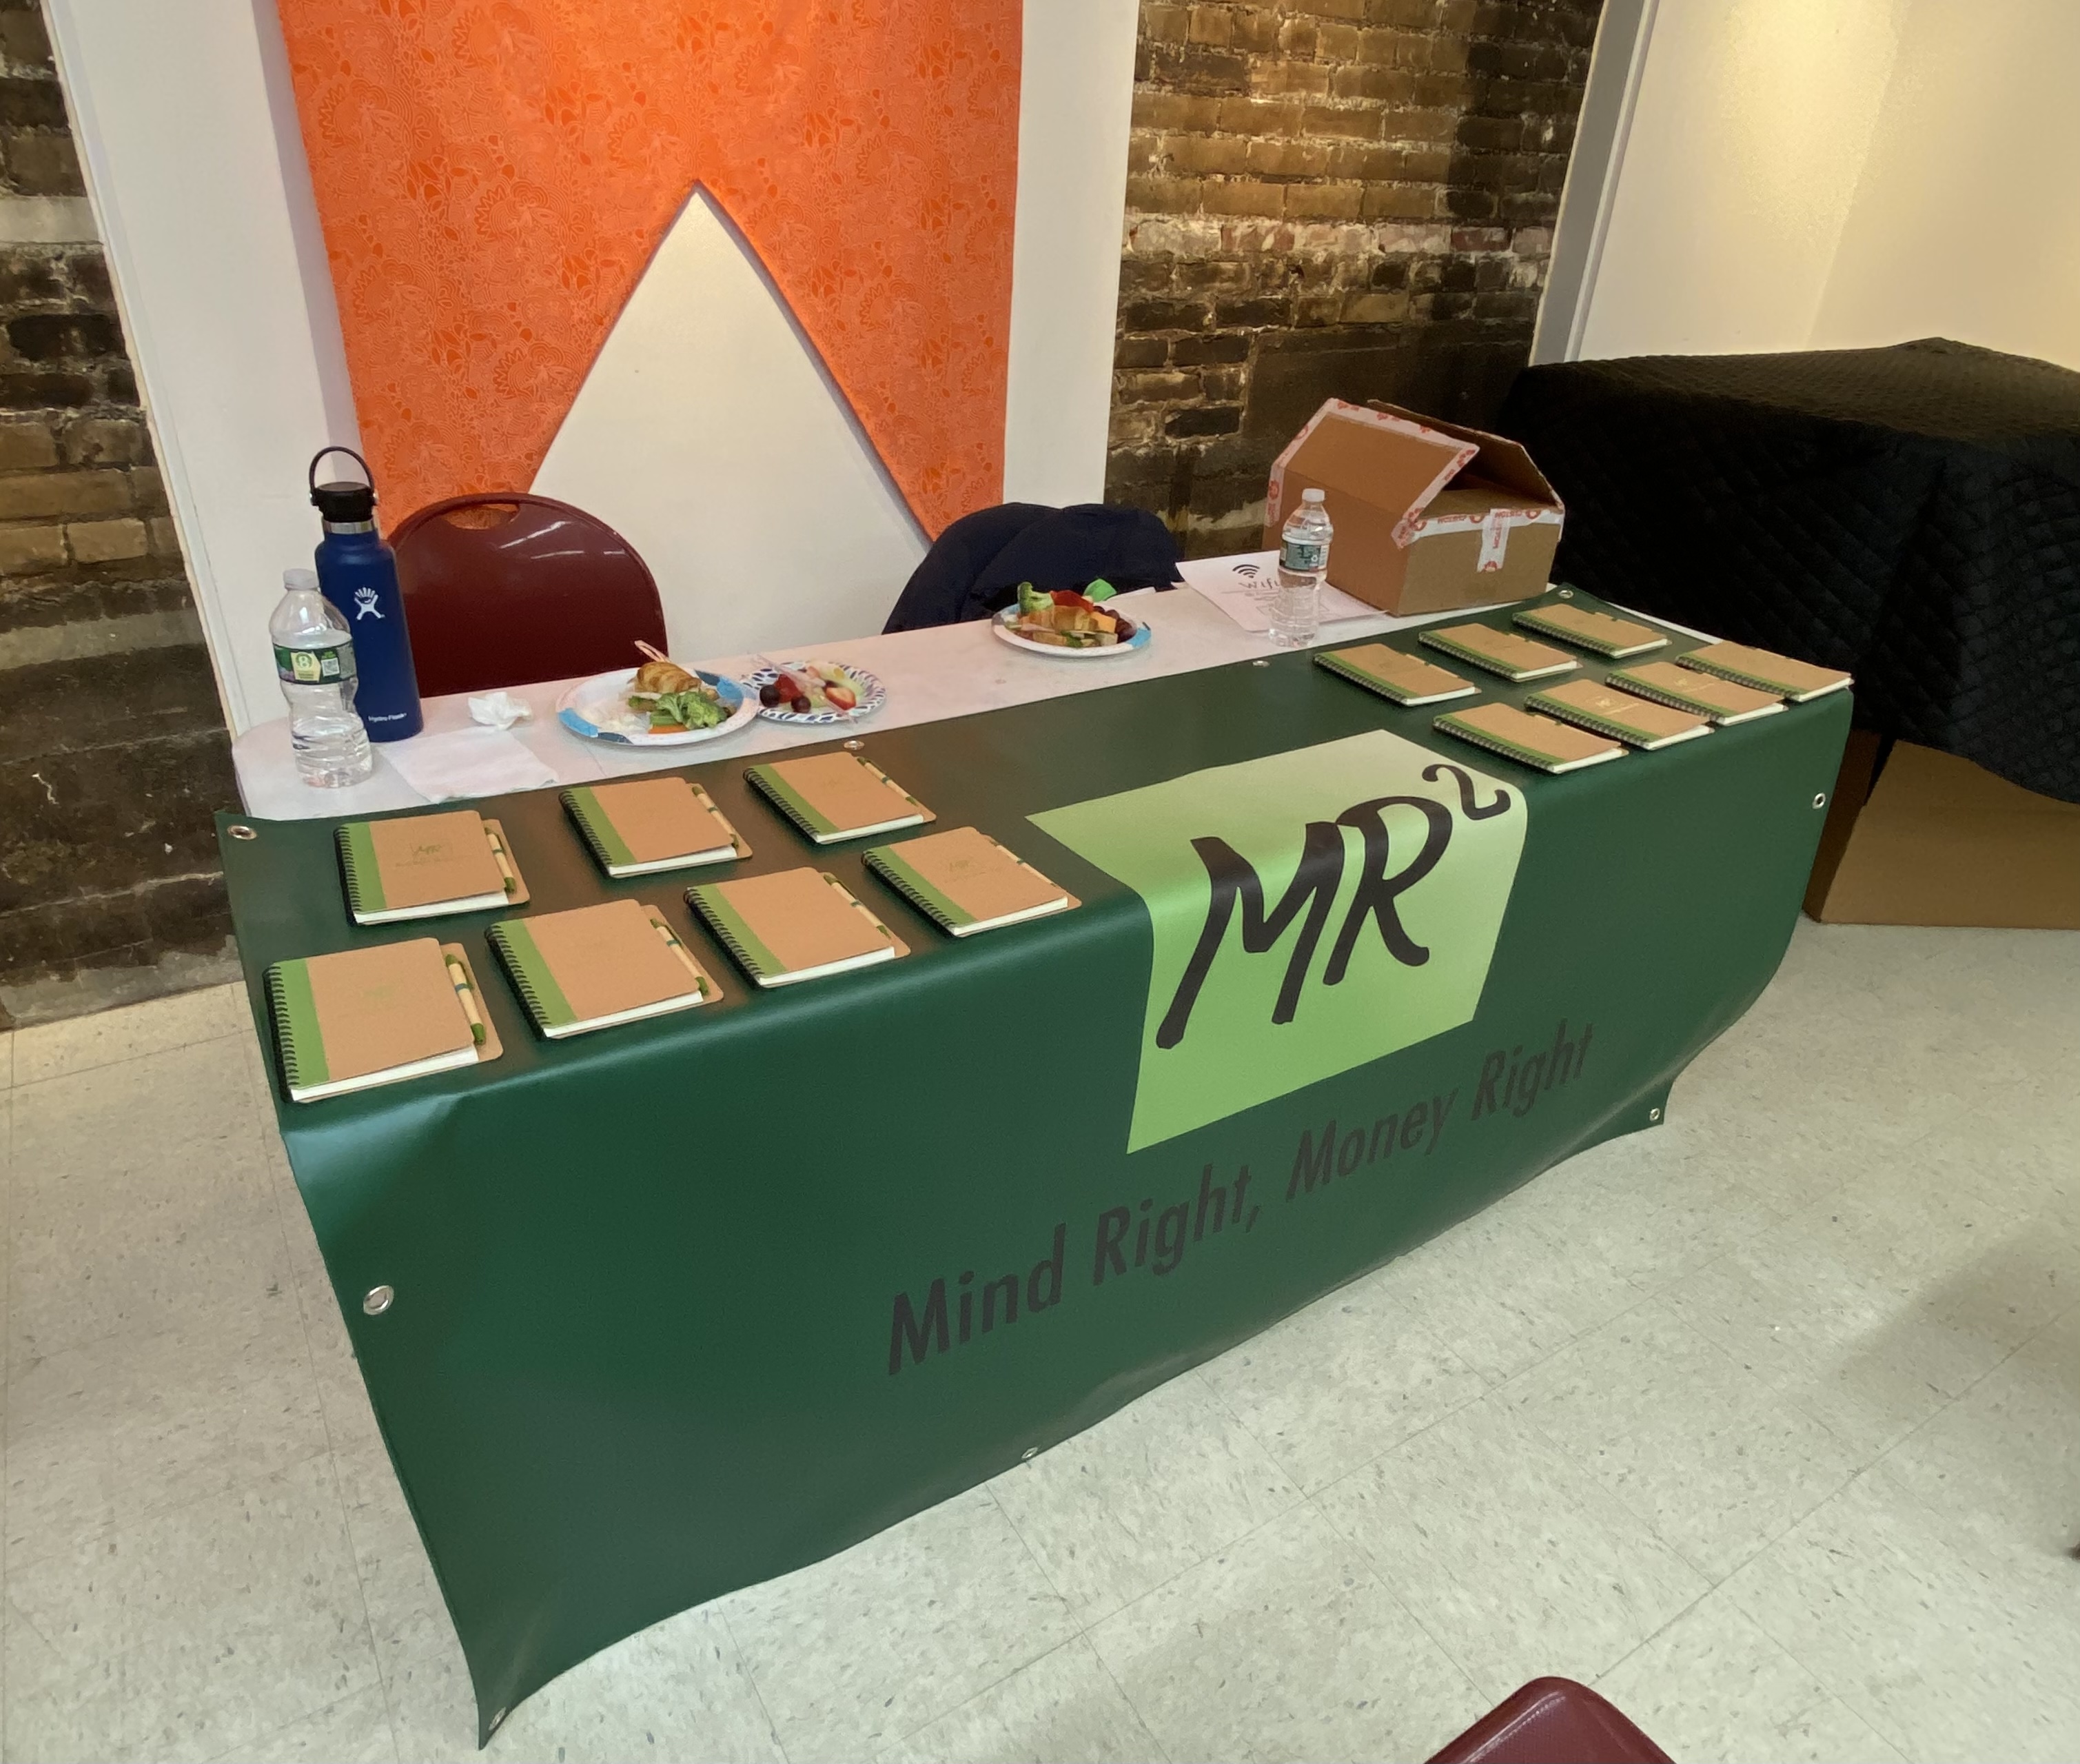 Example of tabling at resource fair for Mind Right, Money Right (MR²) workshop series on financial literacy.